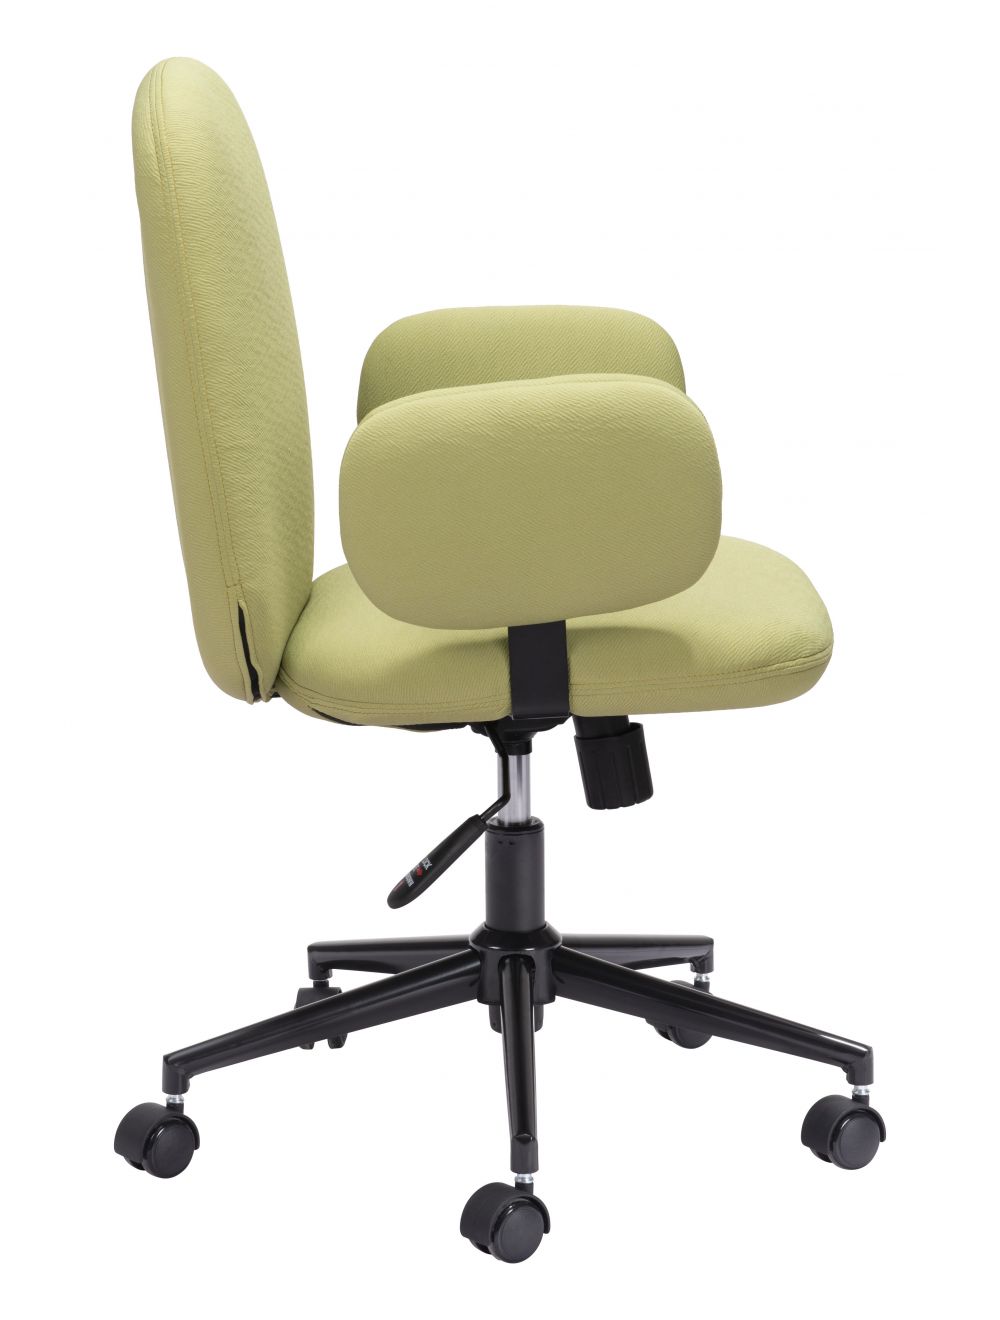 Lionel Office Chair Olive Green